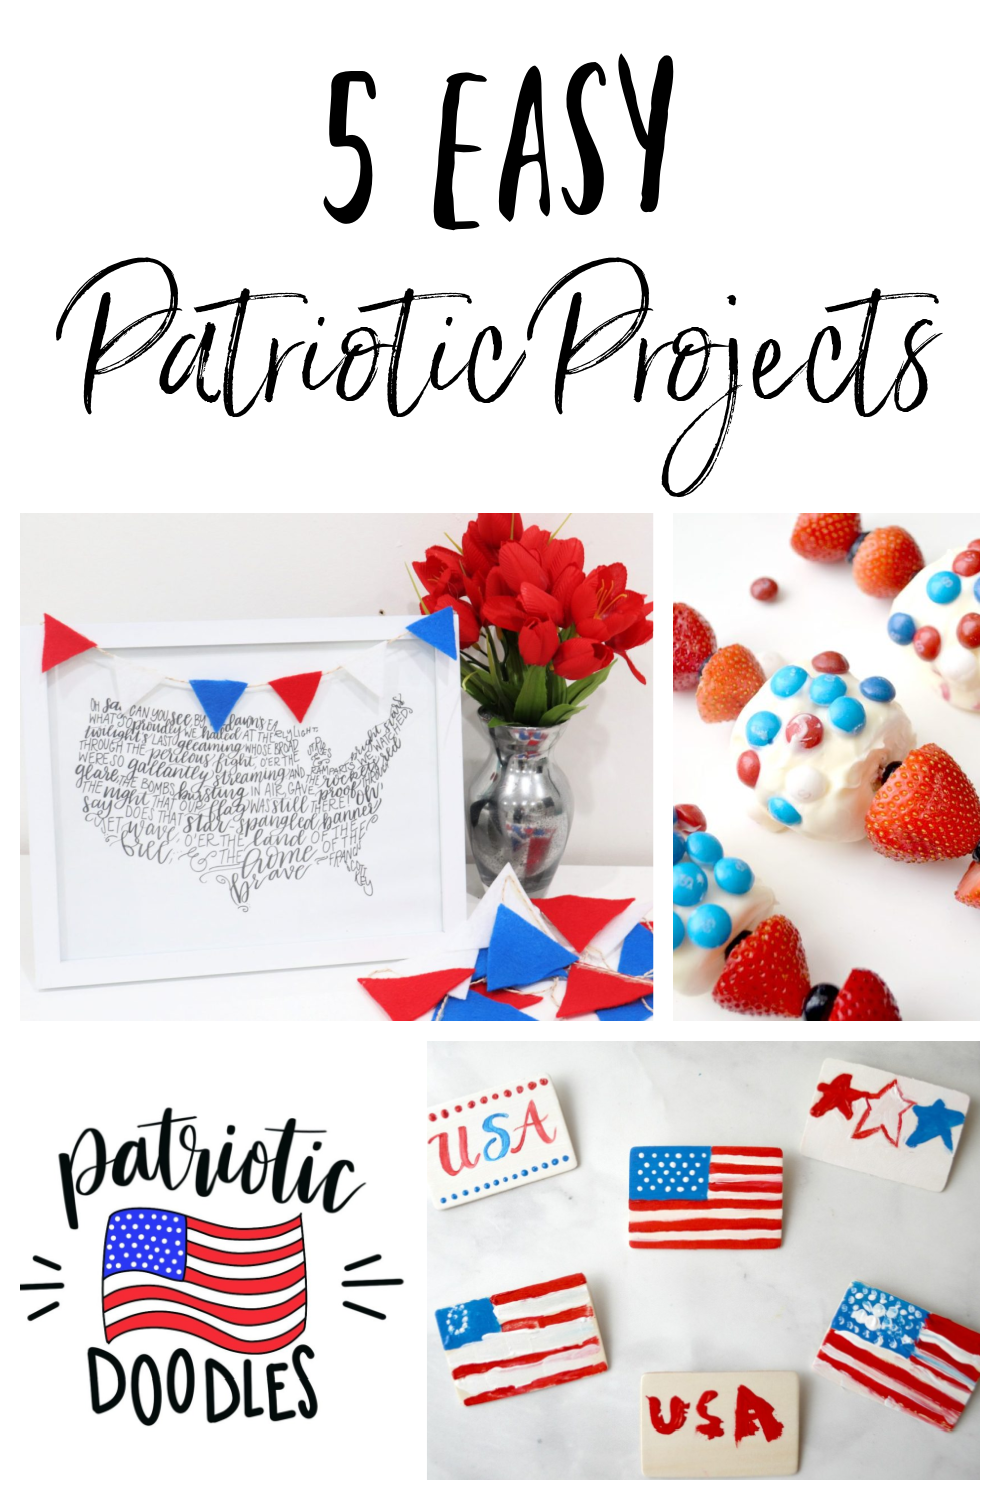 5 Easy Patriotic Projects